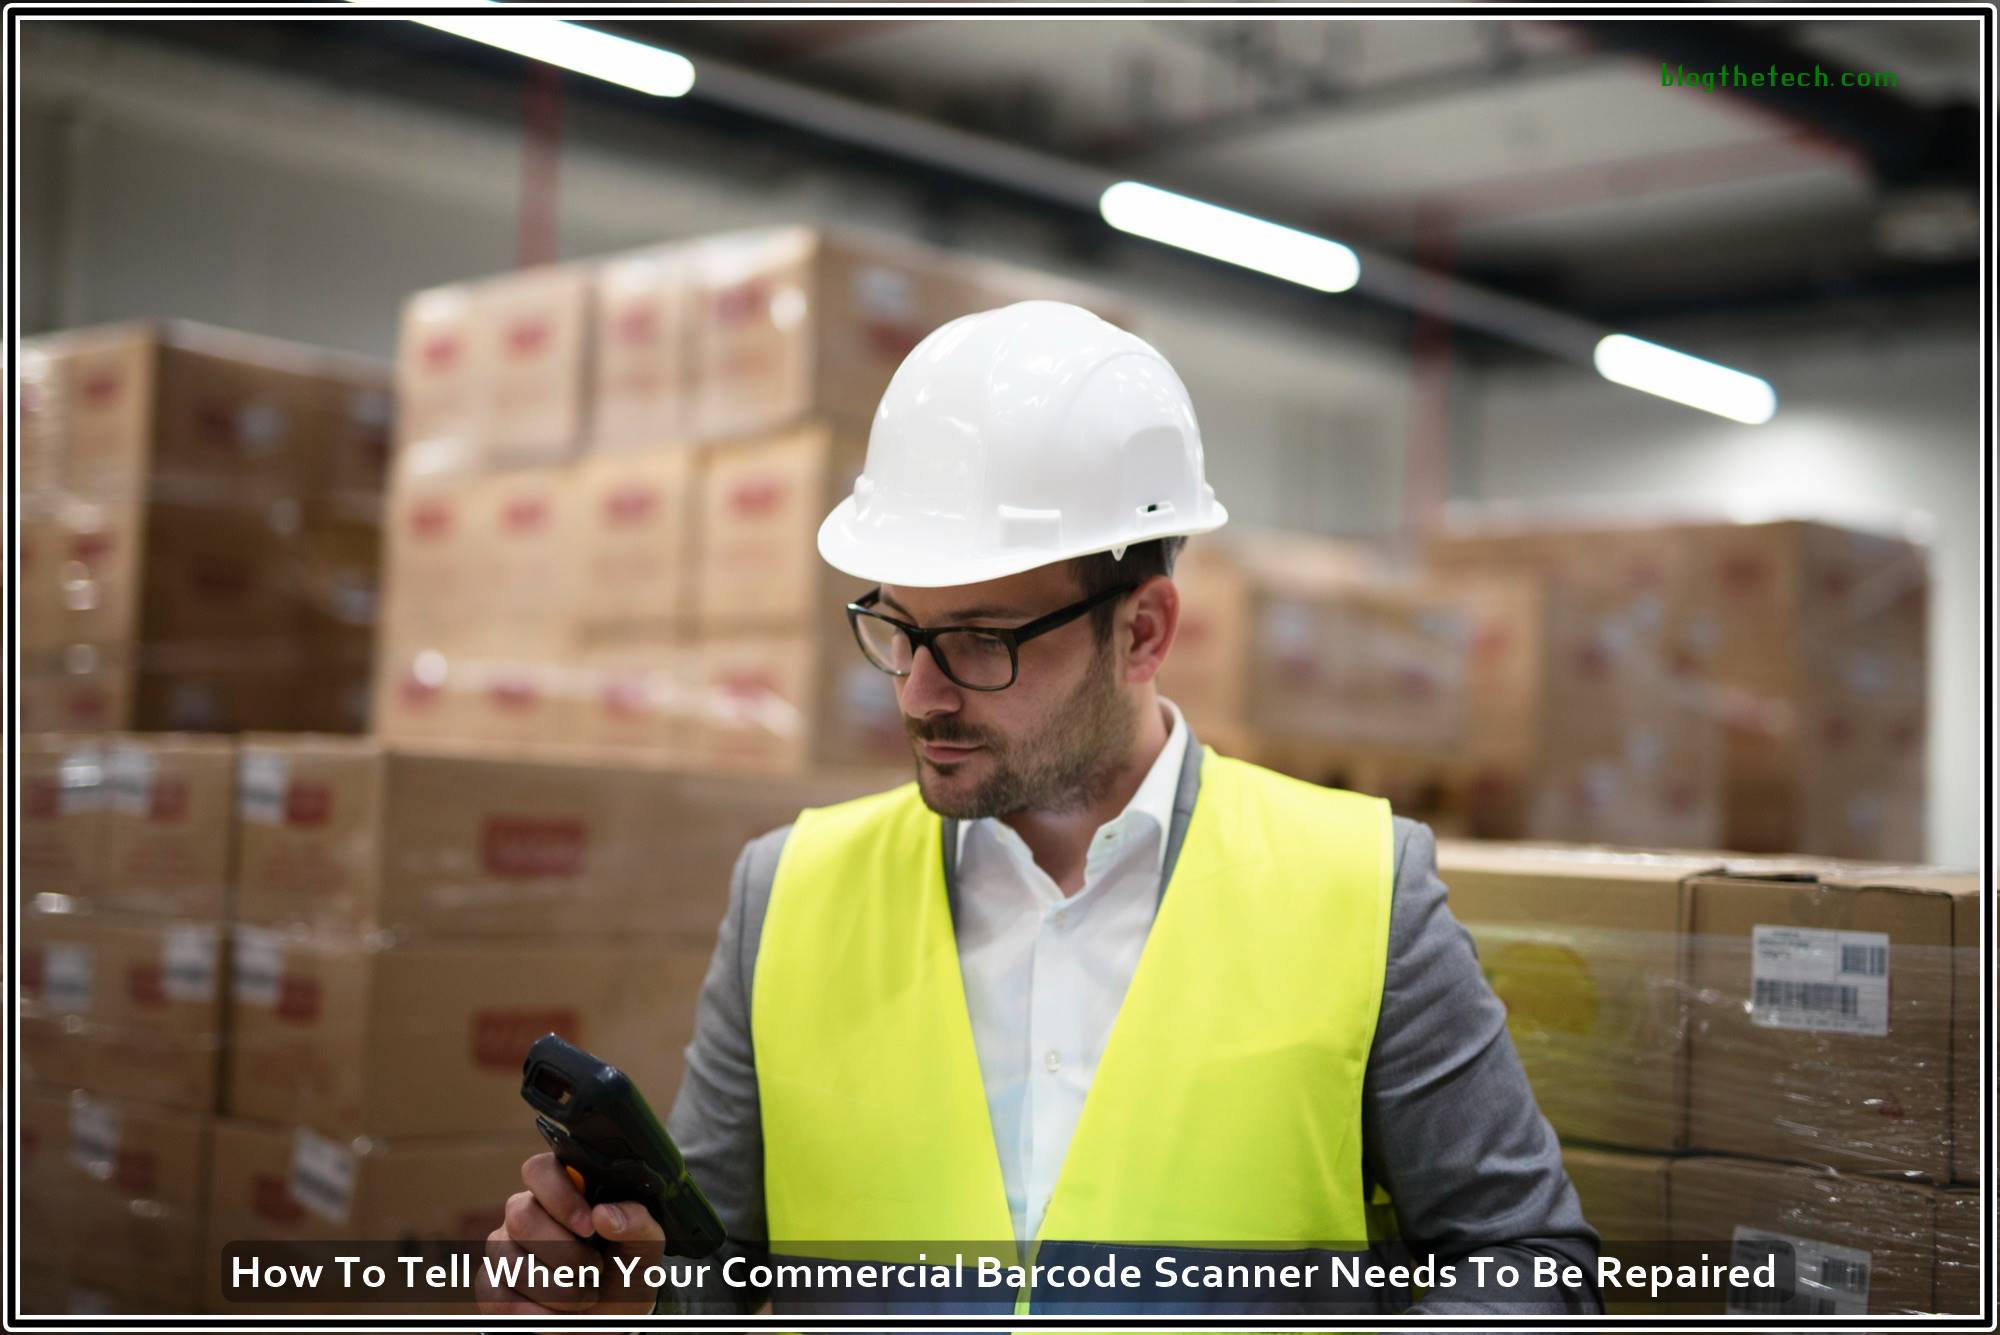 How To Tell When Your Commercial Barcode Scanner Needs To Be Repaired